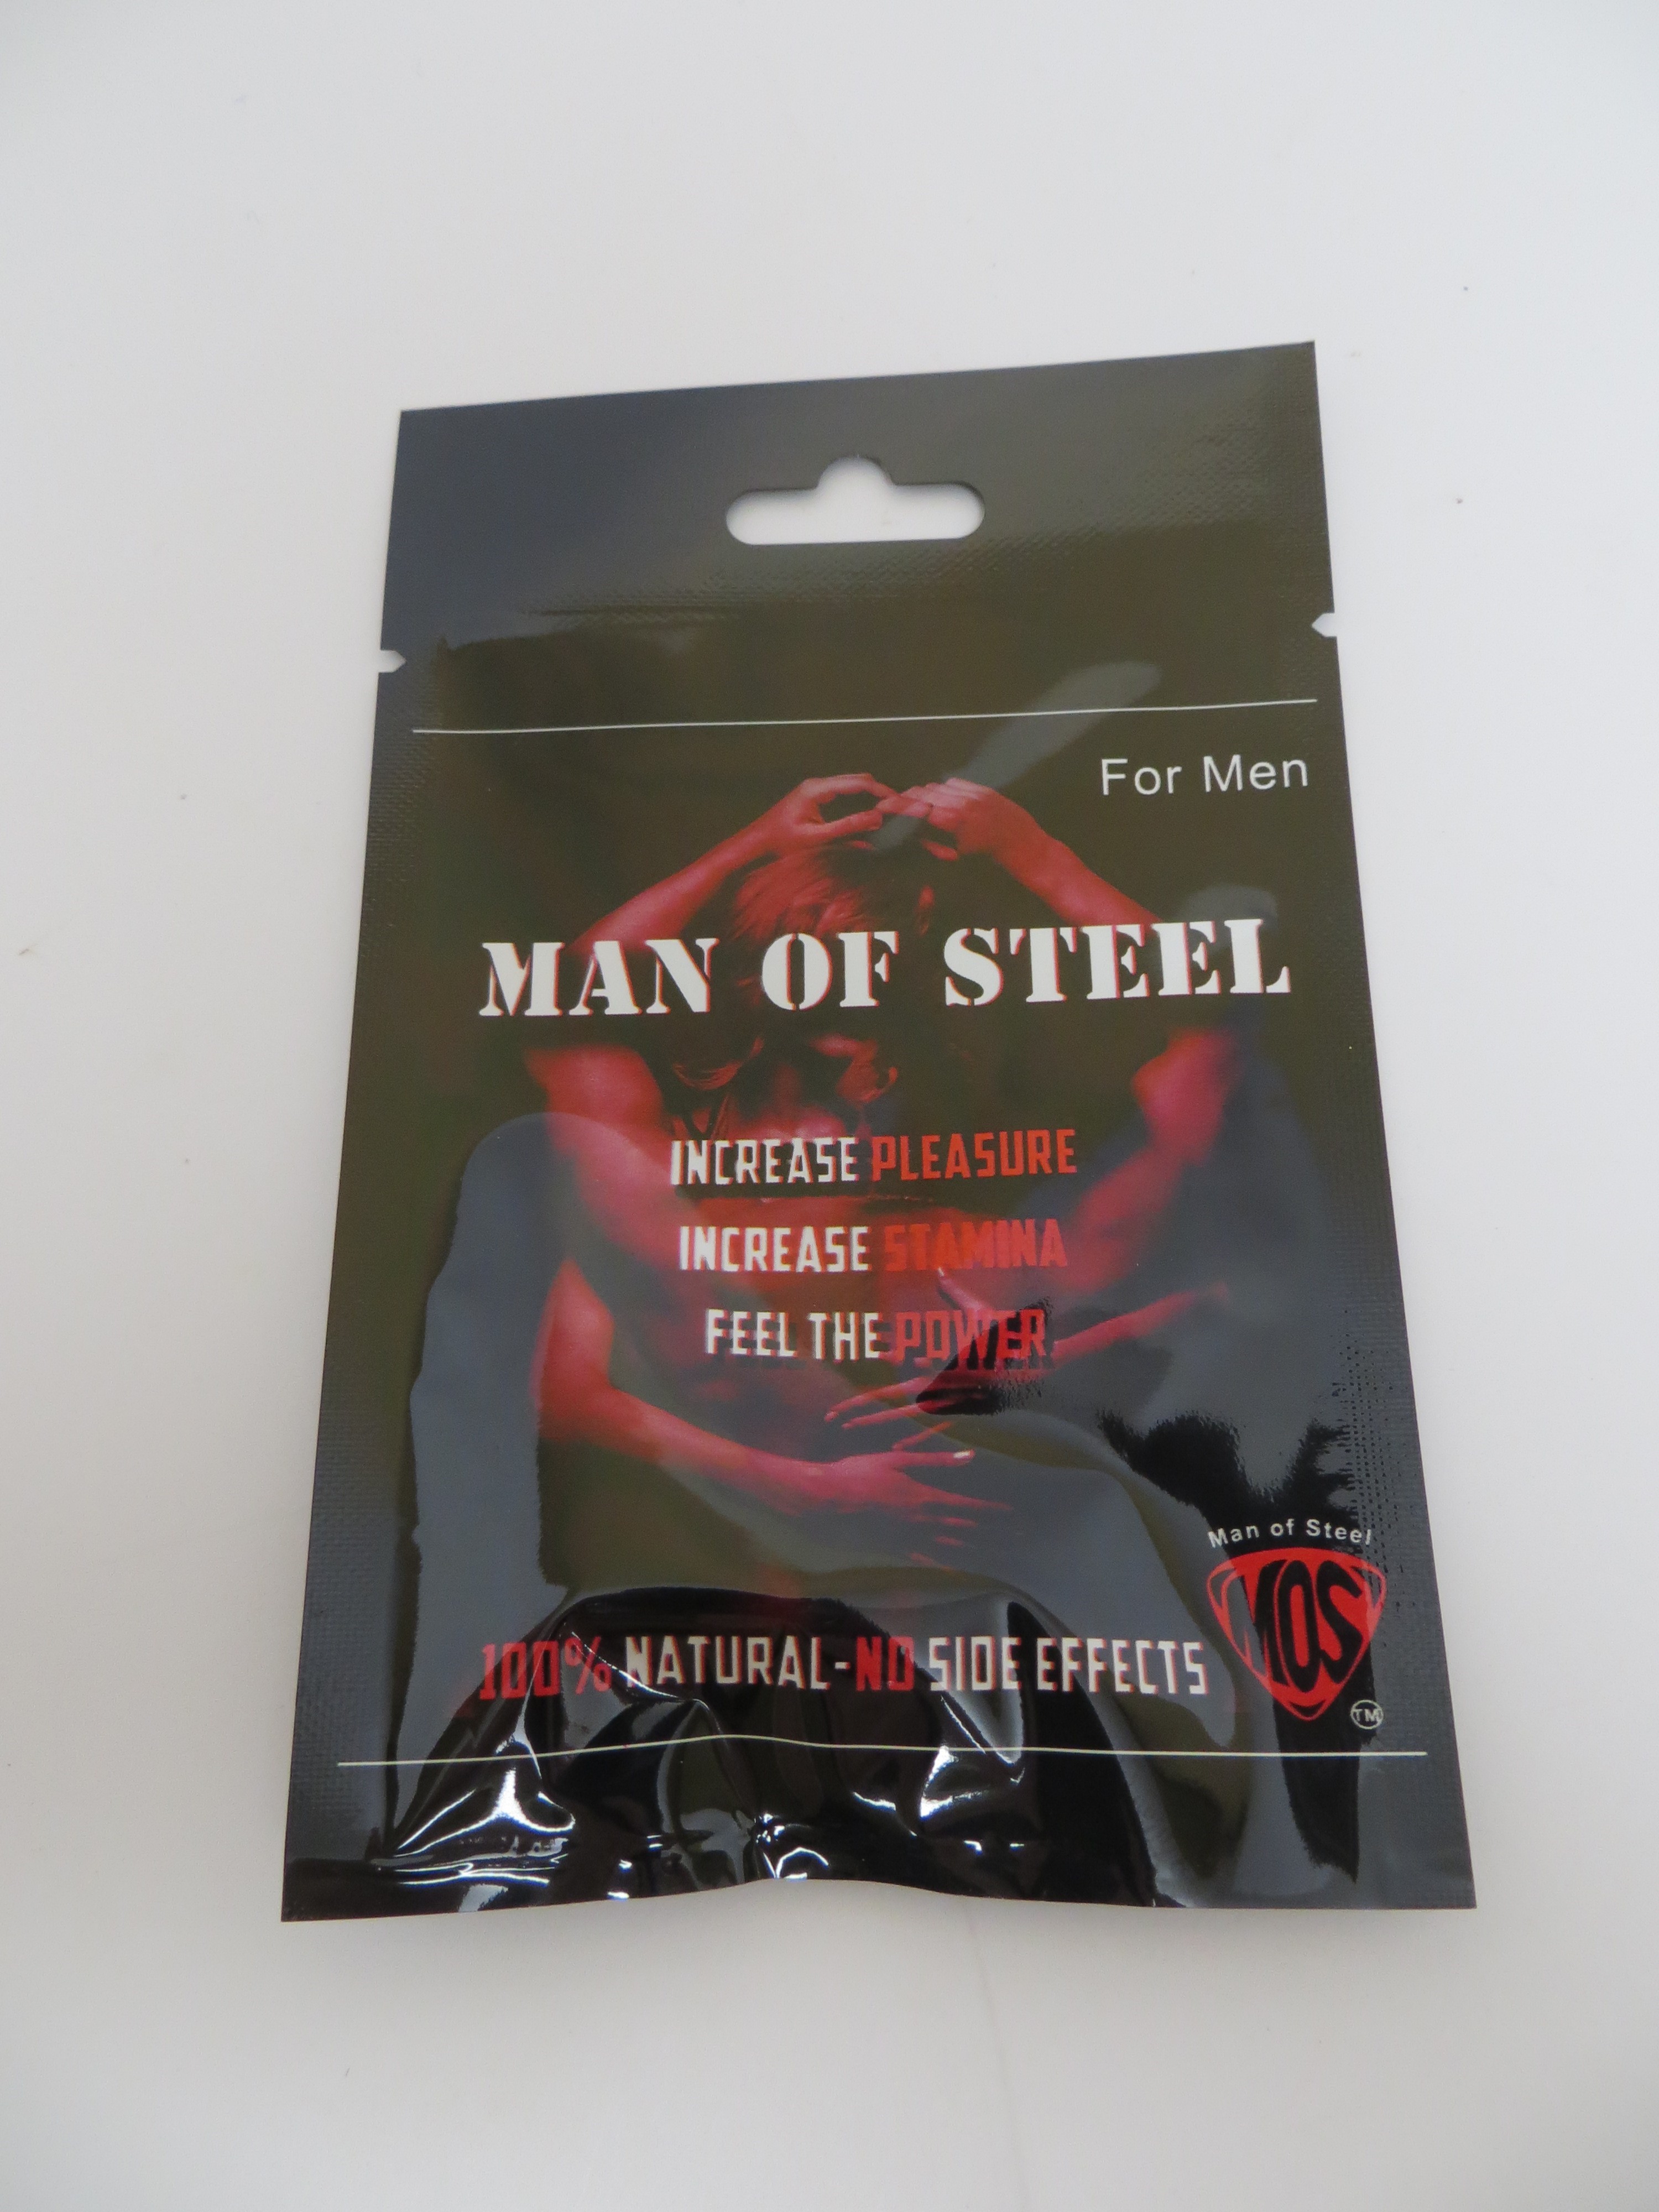 Image of the illigal product: Man of Steel